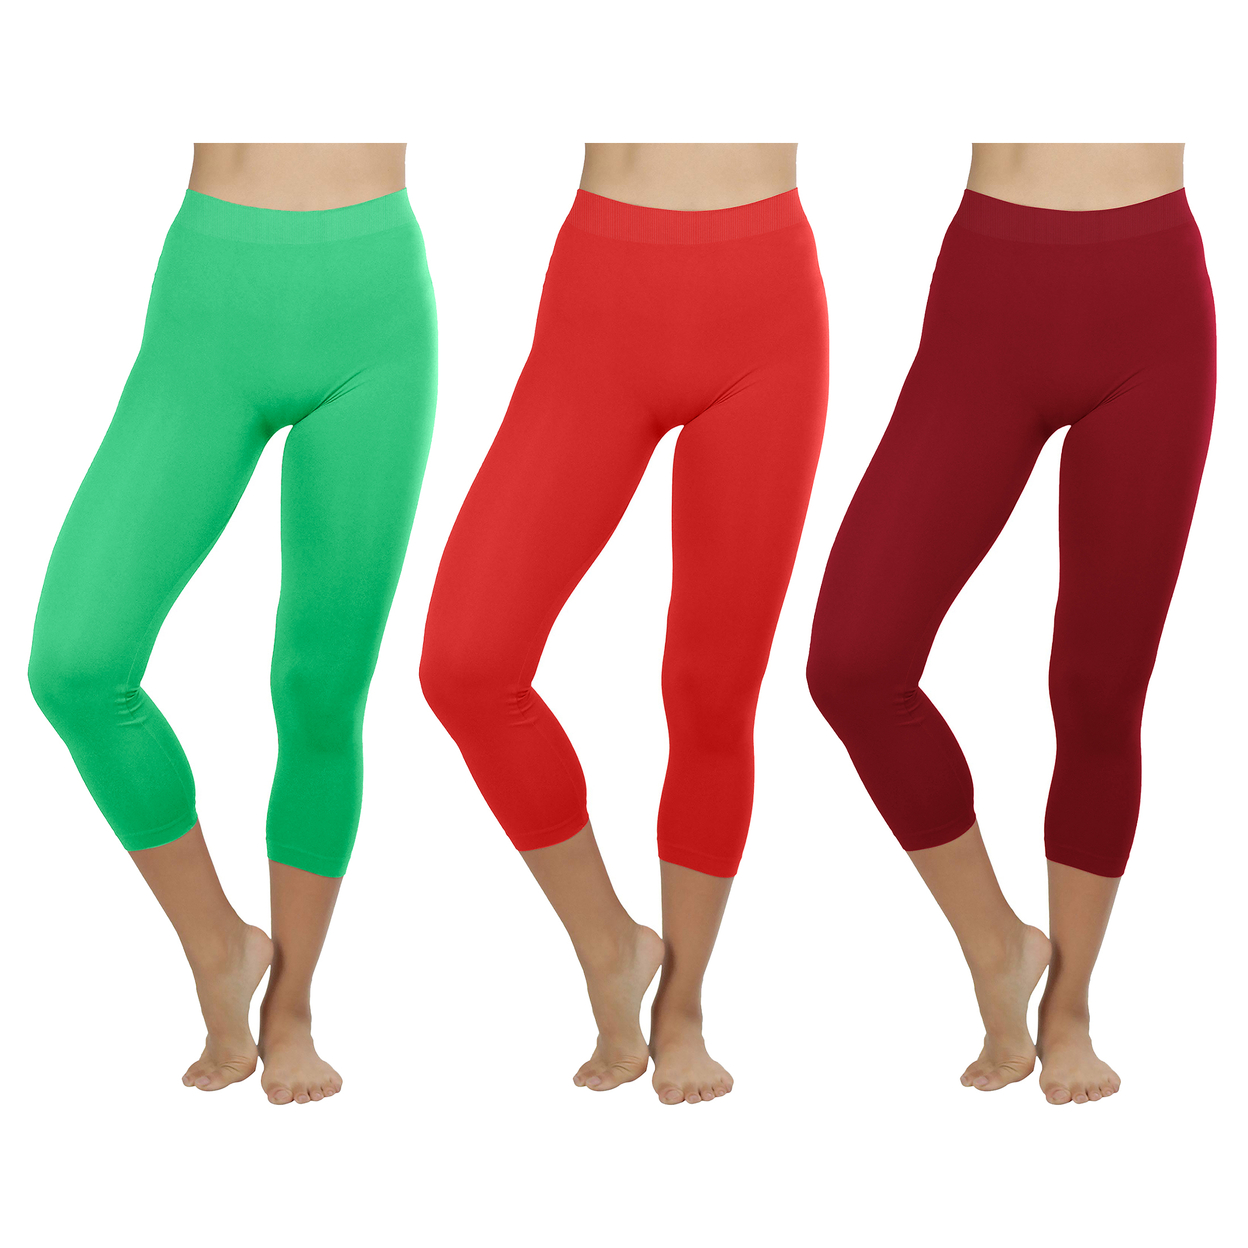 2-Pack: Women's Ultra-Soft High Waisted Smooth Stretch Active Yoga Capri Leggings - Green & Burgundy, X-large